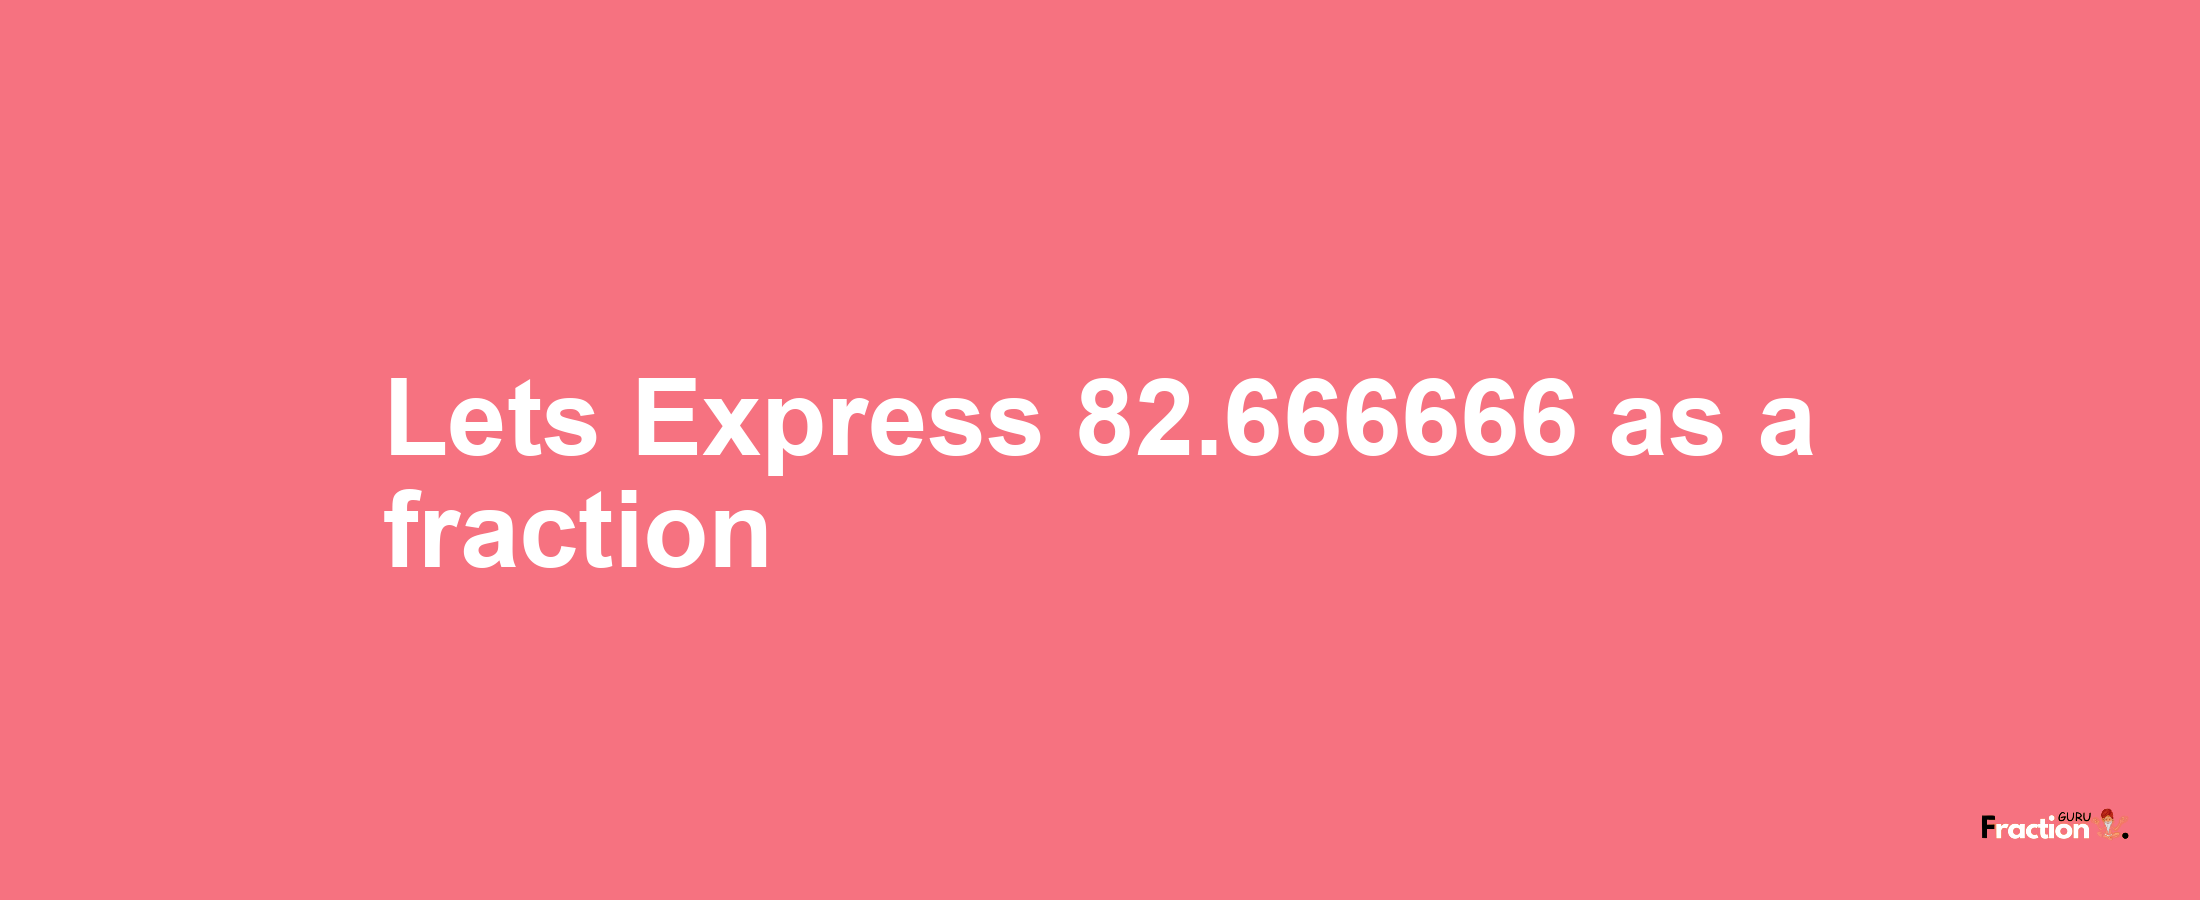 Lets Express 82.666666 as afraction